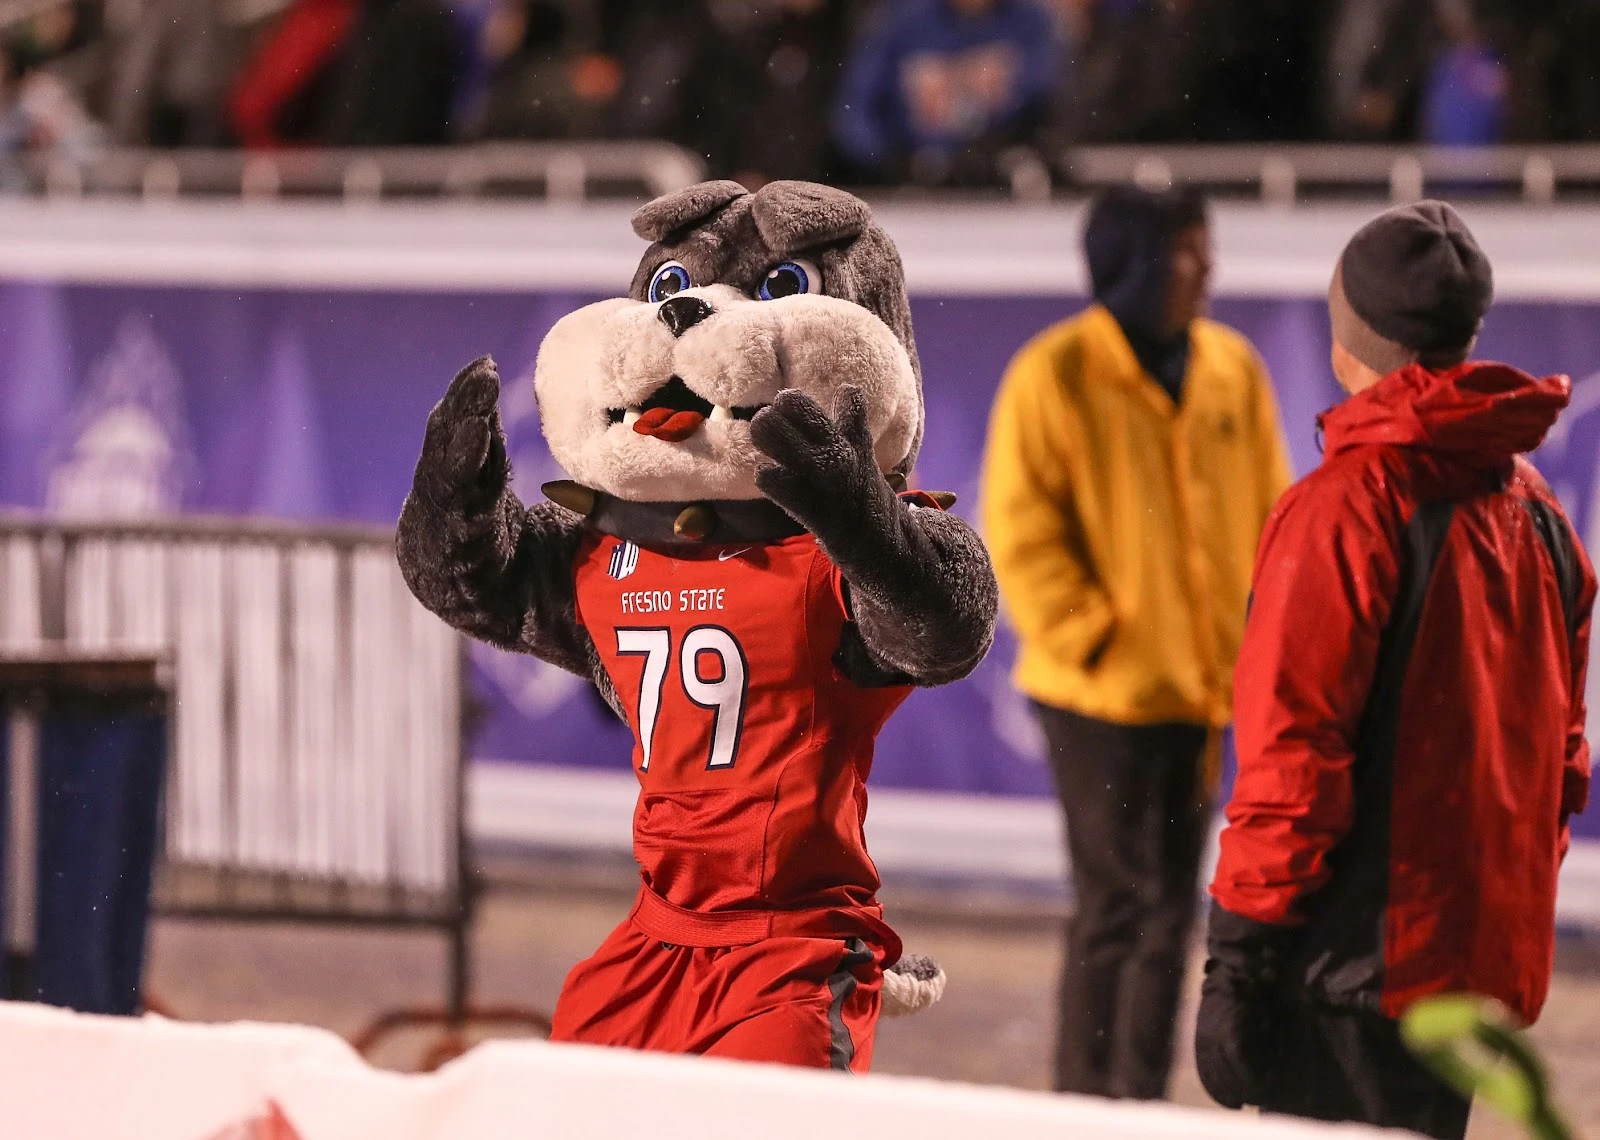 The Fresno State Bulldogs mascot, Victor E. Bulldog, performs during second half action in the Mountain West Championship.